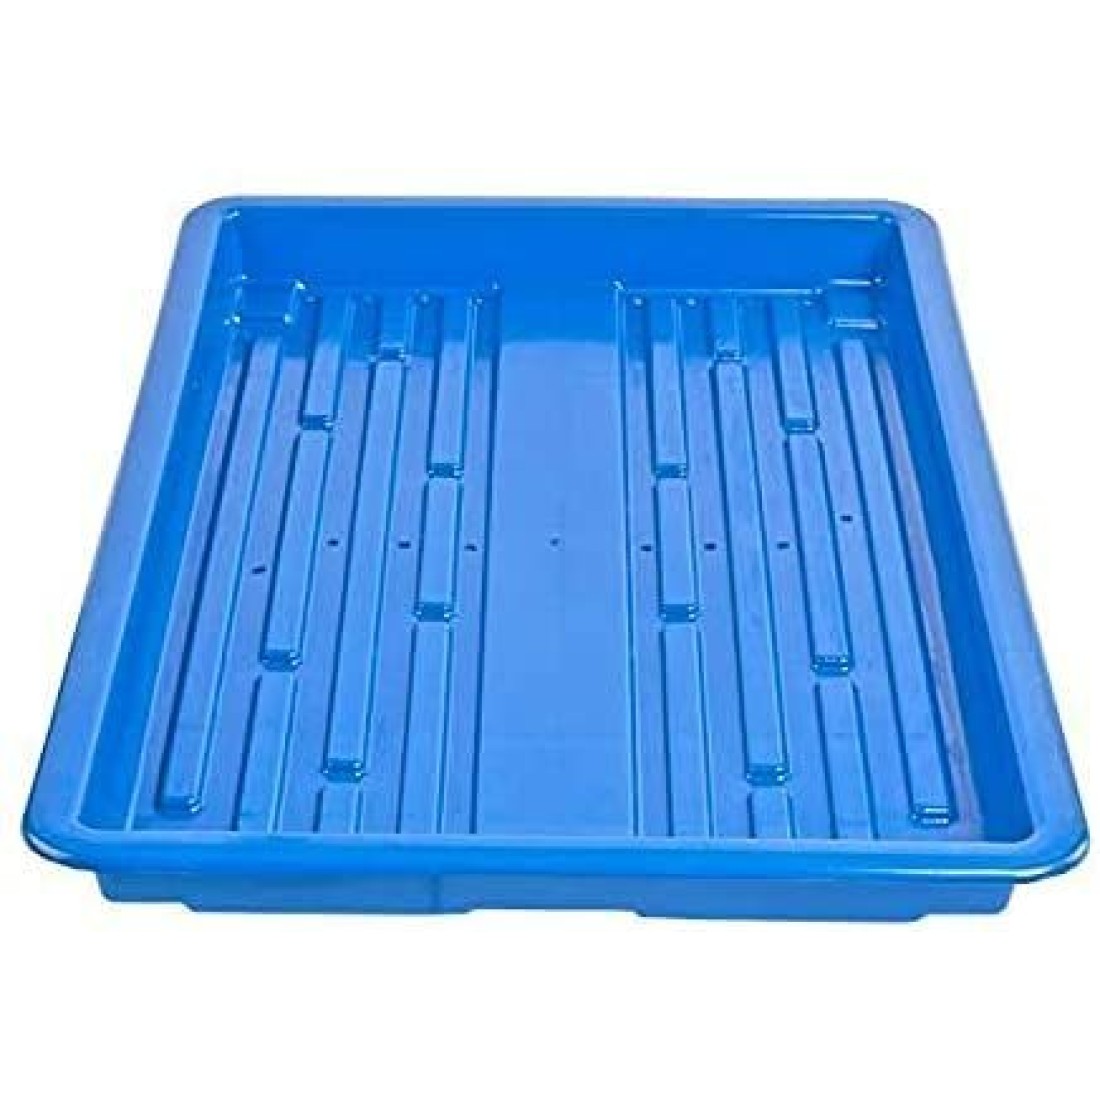 Hydroponics Germination Plastic Tray for Fodder Maize/microgreens/Seedling/Wheatgrass (Blue),pack of 10 trays 2